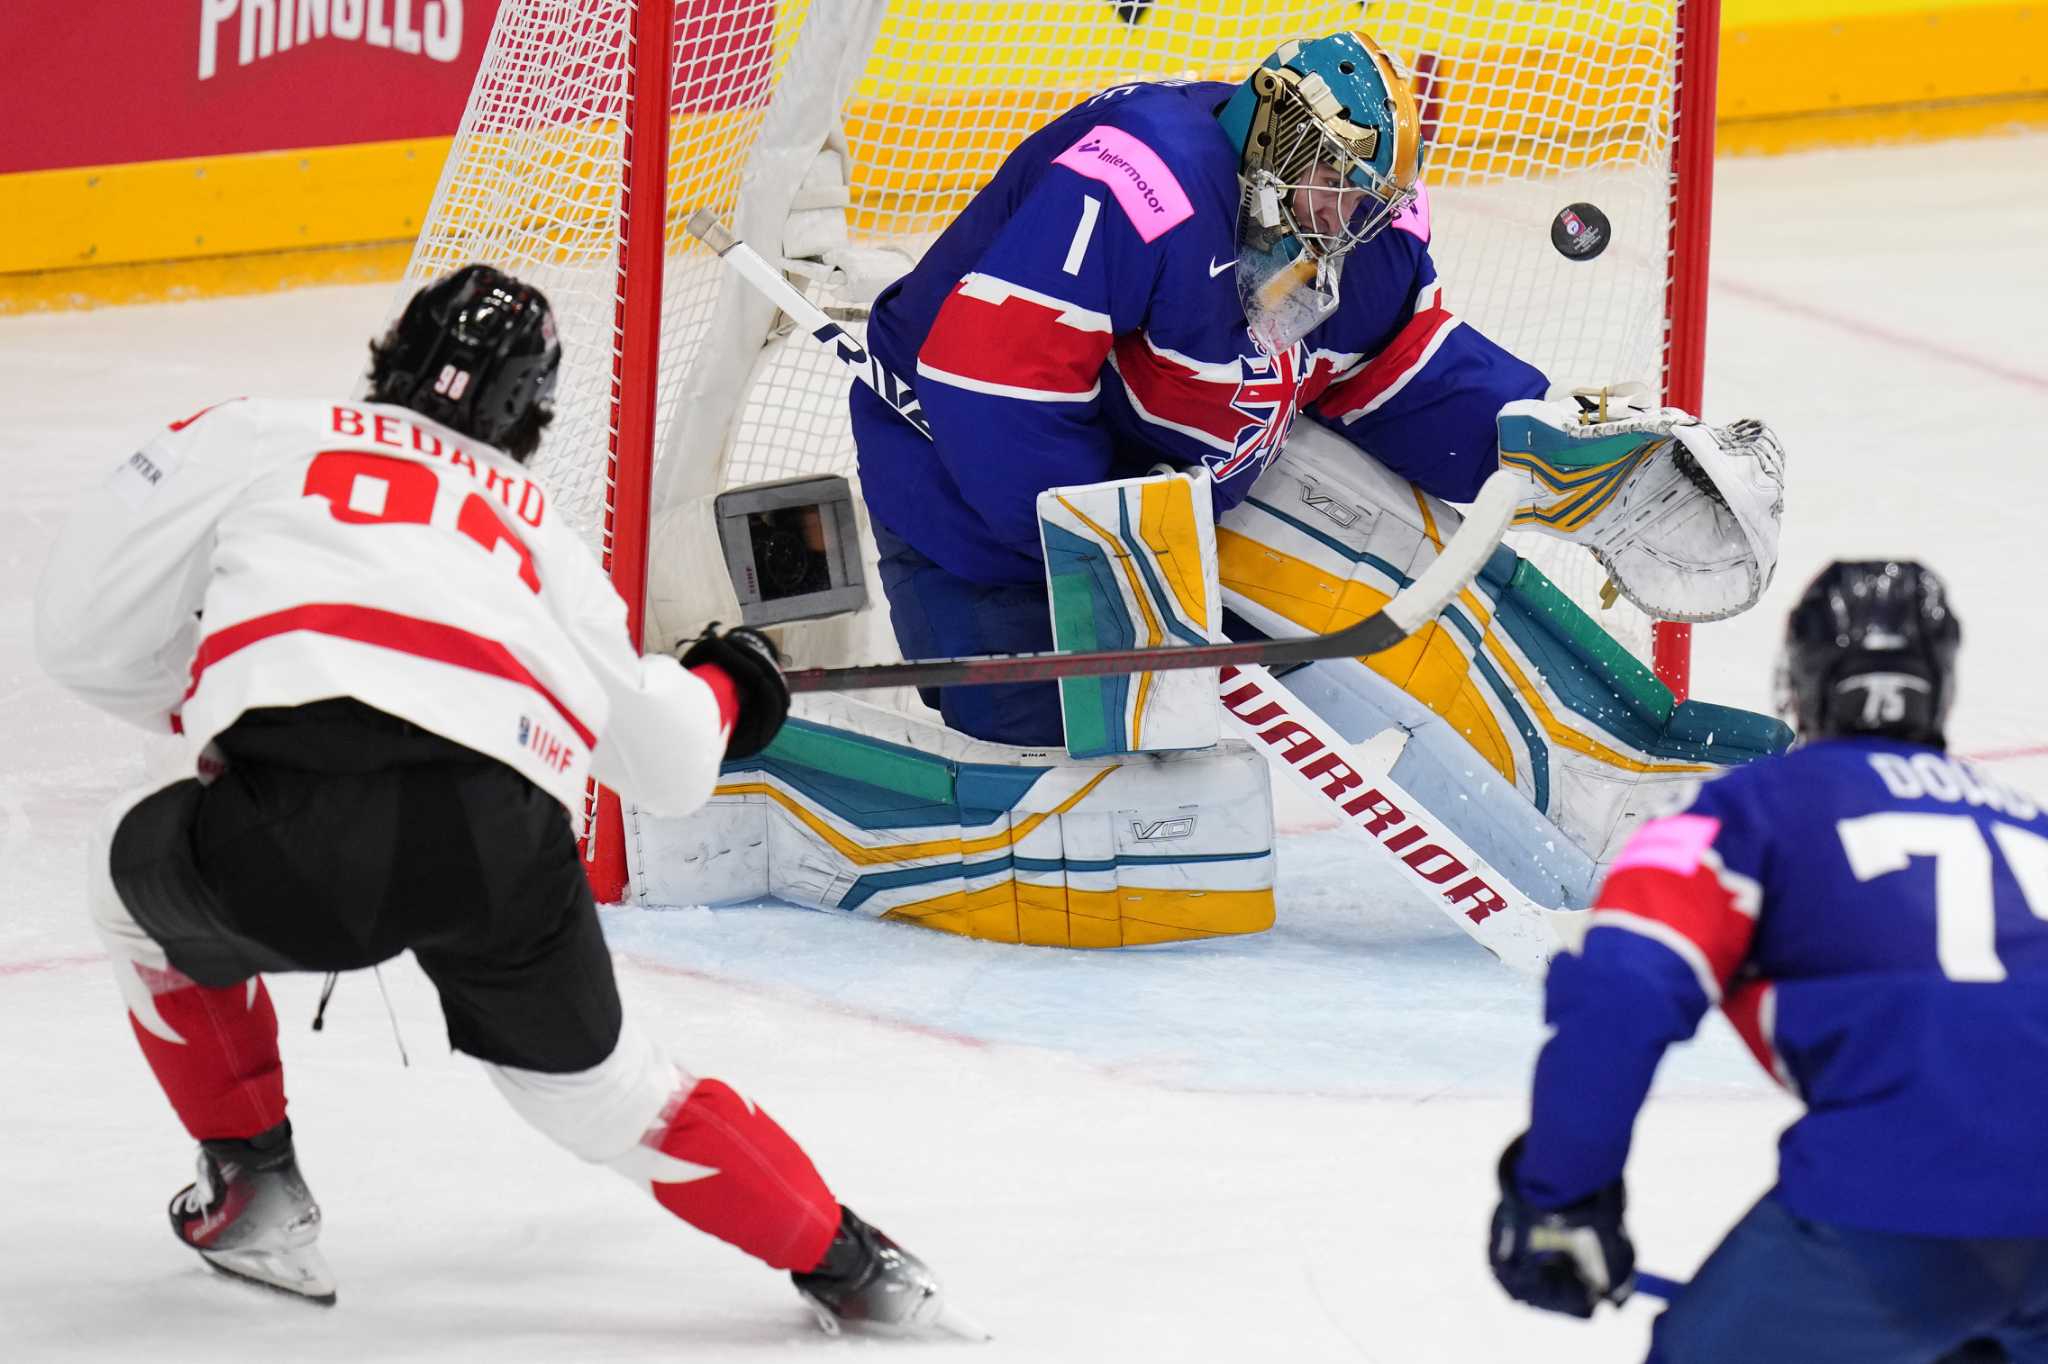 Connor Bedard scores twice as Canada rallies to beat Britain 4-2 at hockey worlds